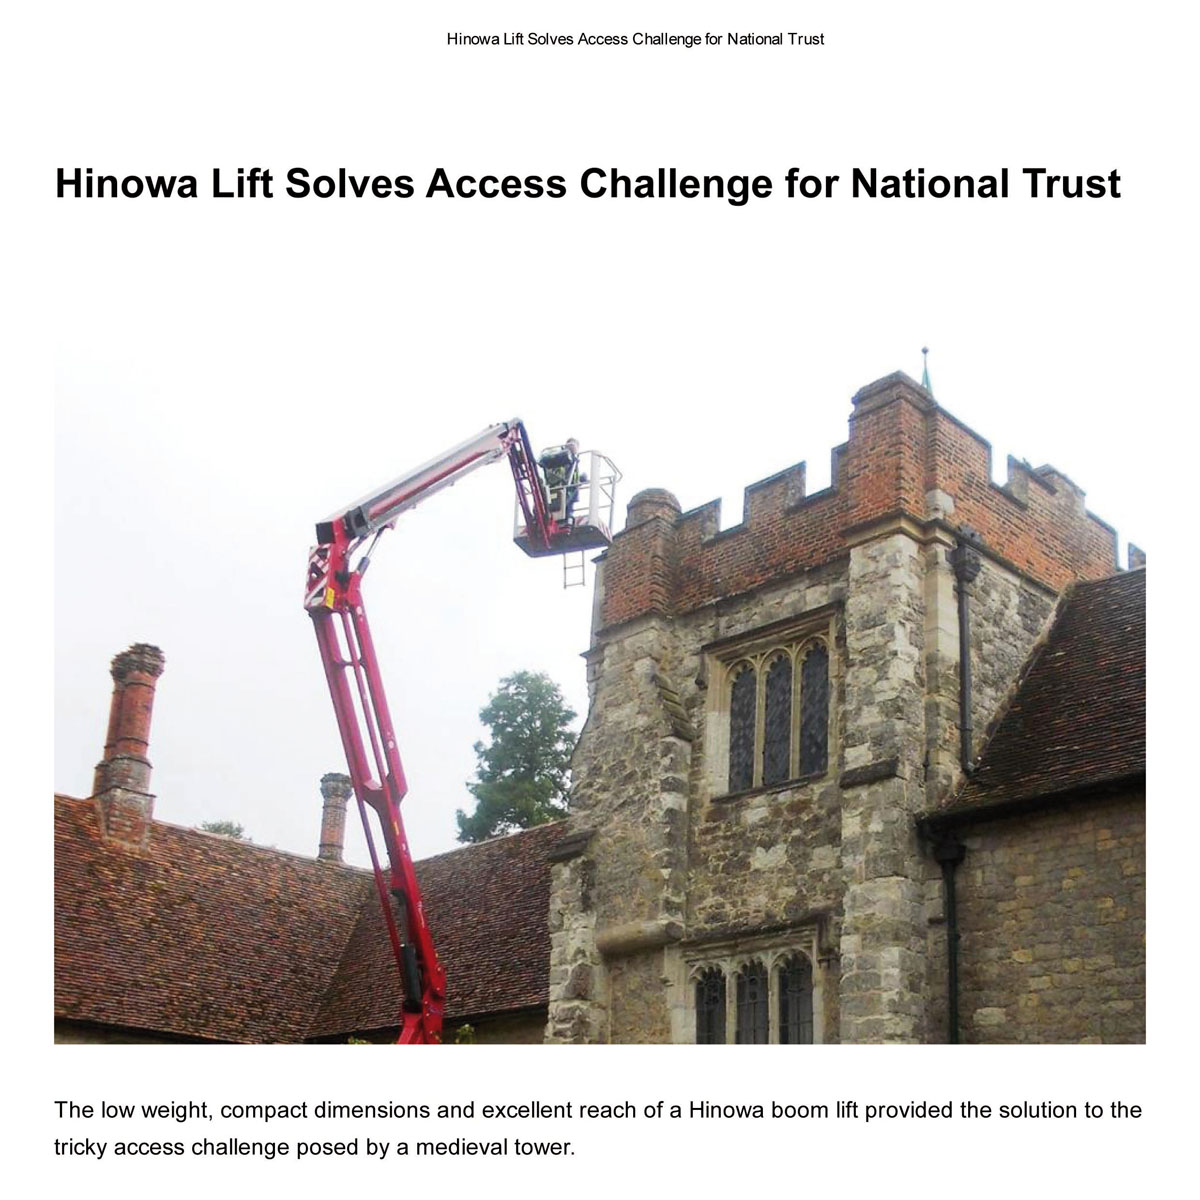 icona_hinowa_lift_solves_access_challenge_for_national_trust.jpg